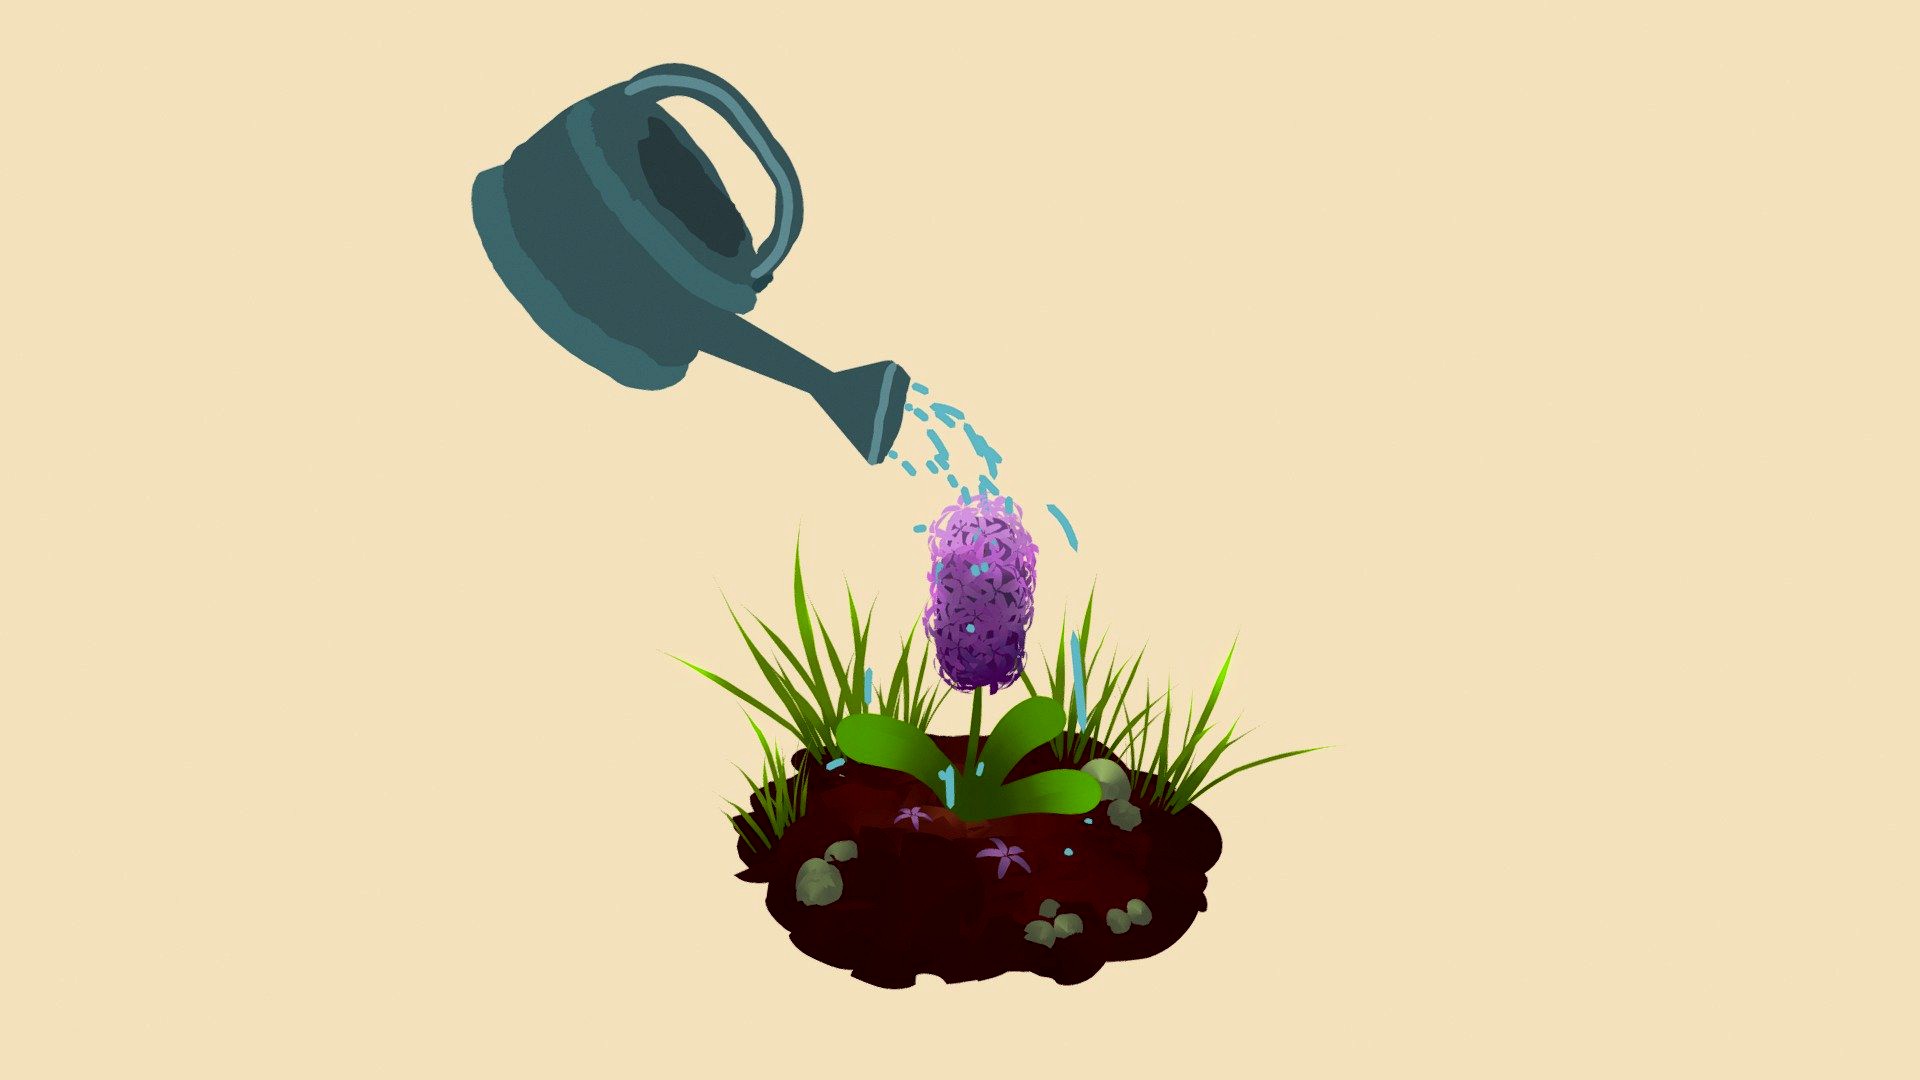 Quillustration Flower and Water-Can